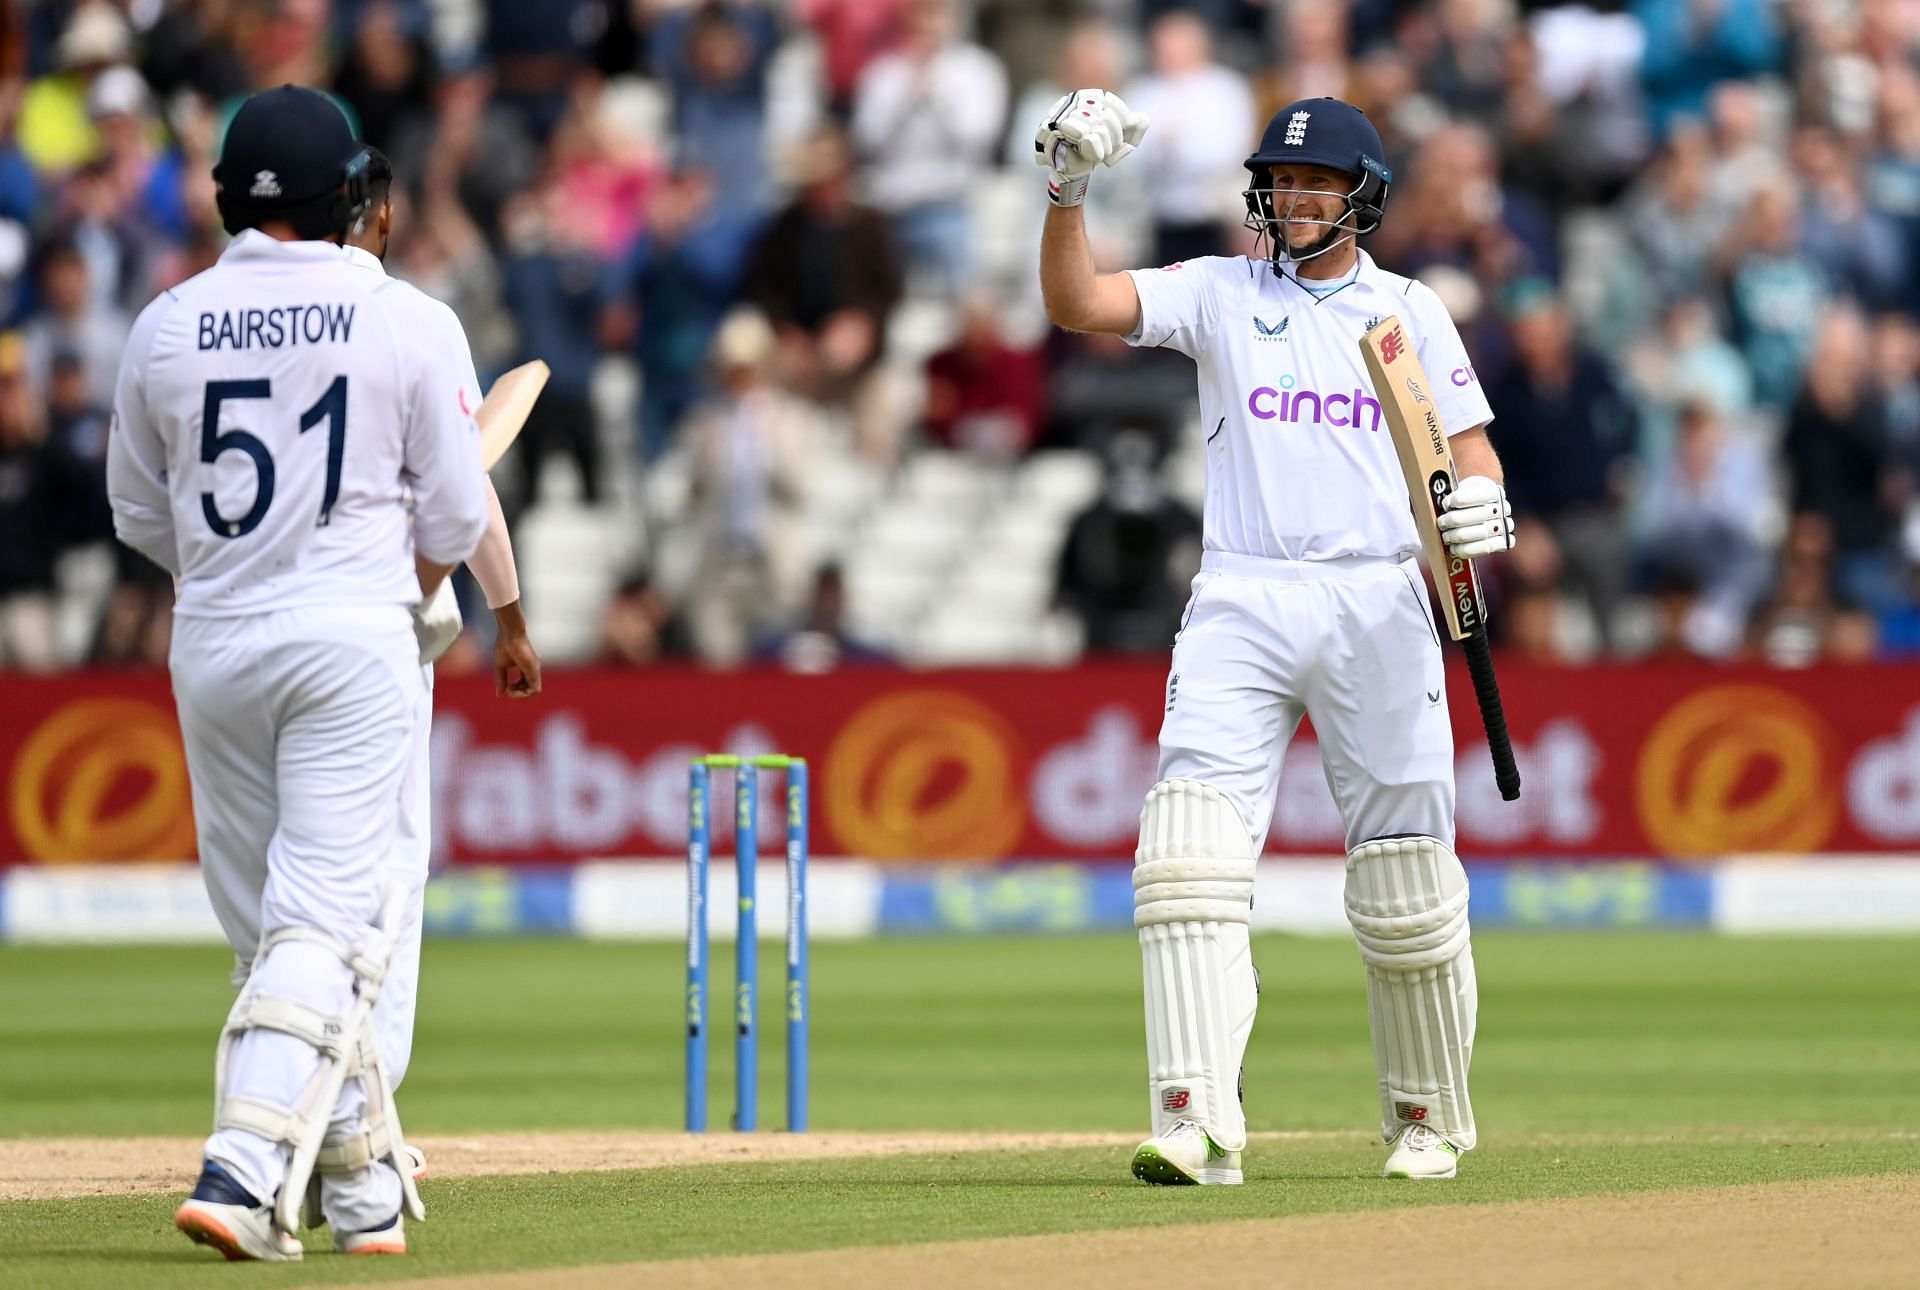 England v India - Fifth LV= Insurance Test Match: Day Five